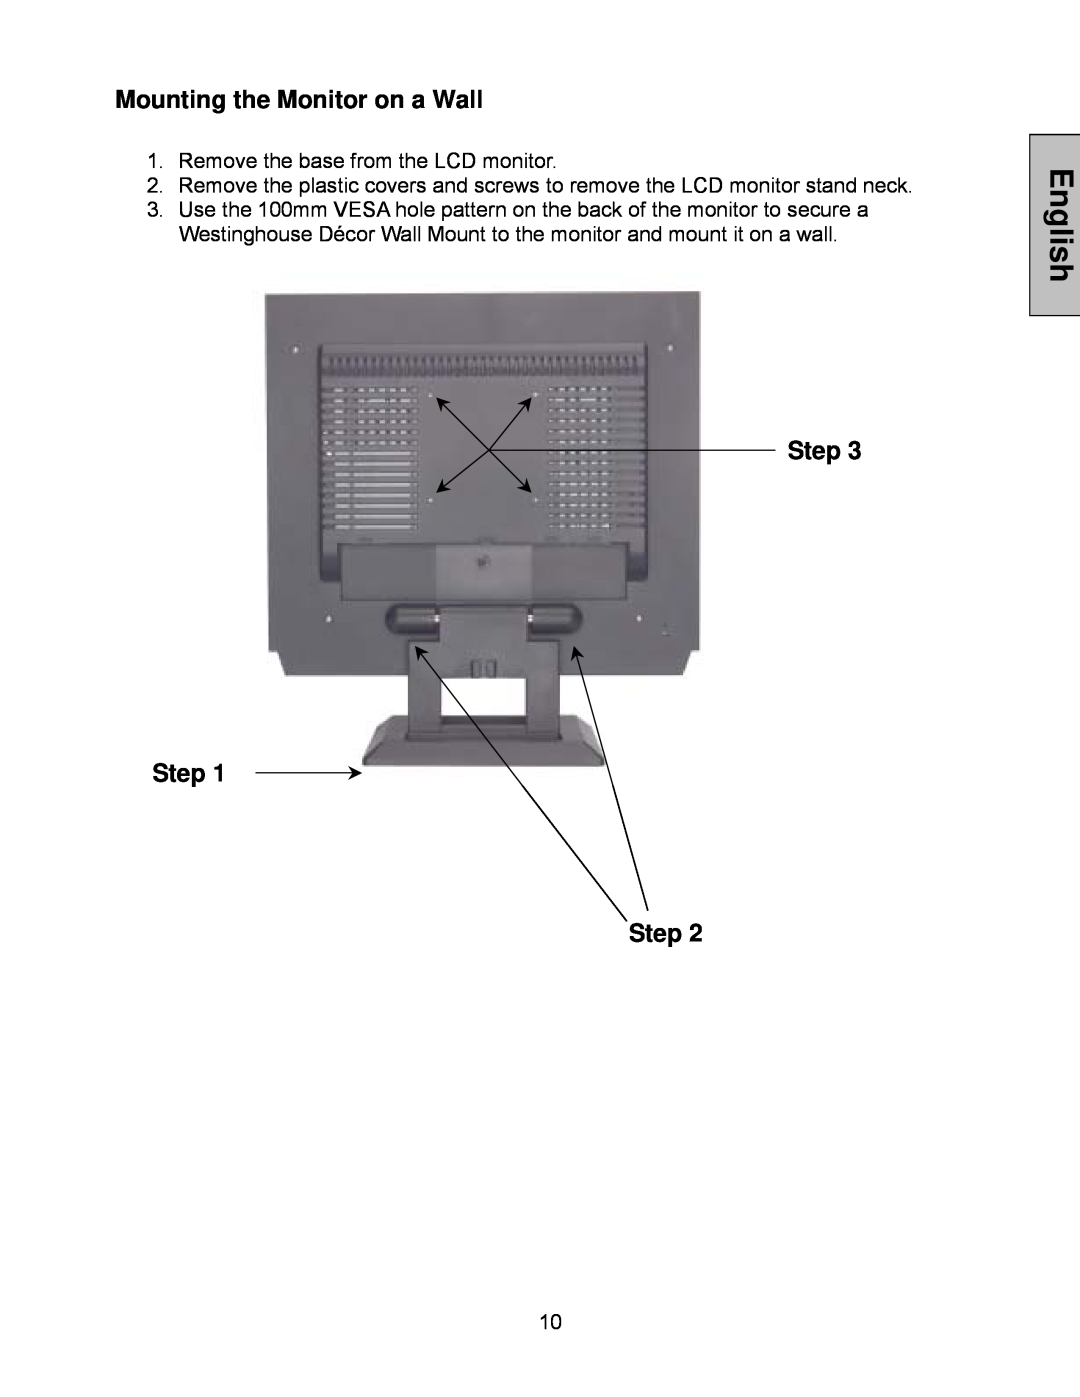 Westinghouse LCM - 19v5 manual Mounting the Monitor on a Wall, Step Step Step, English 